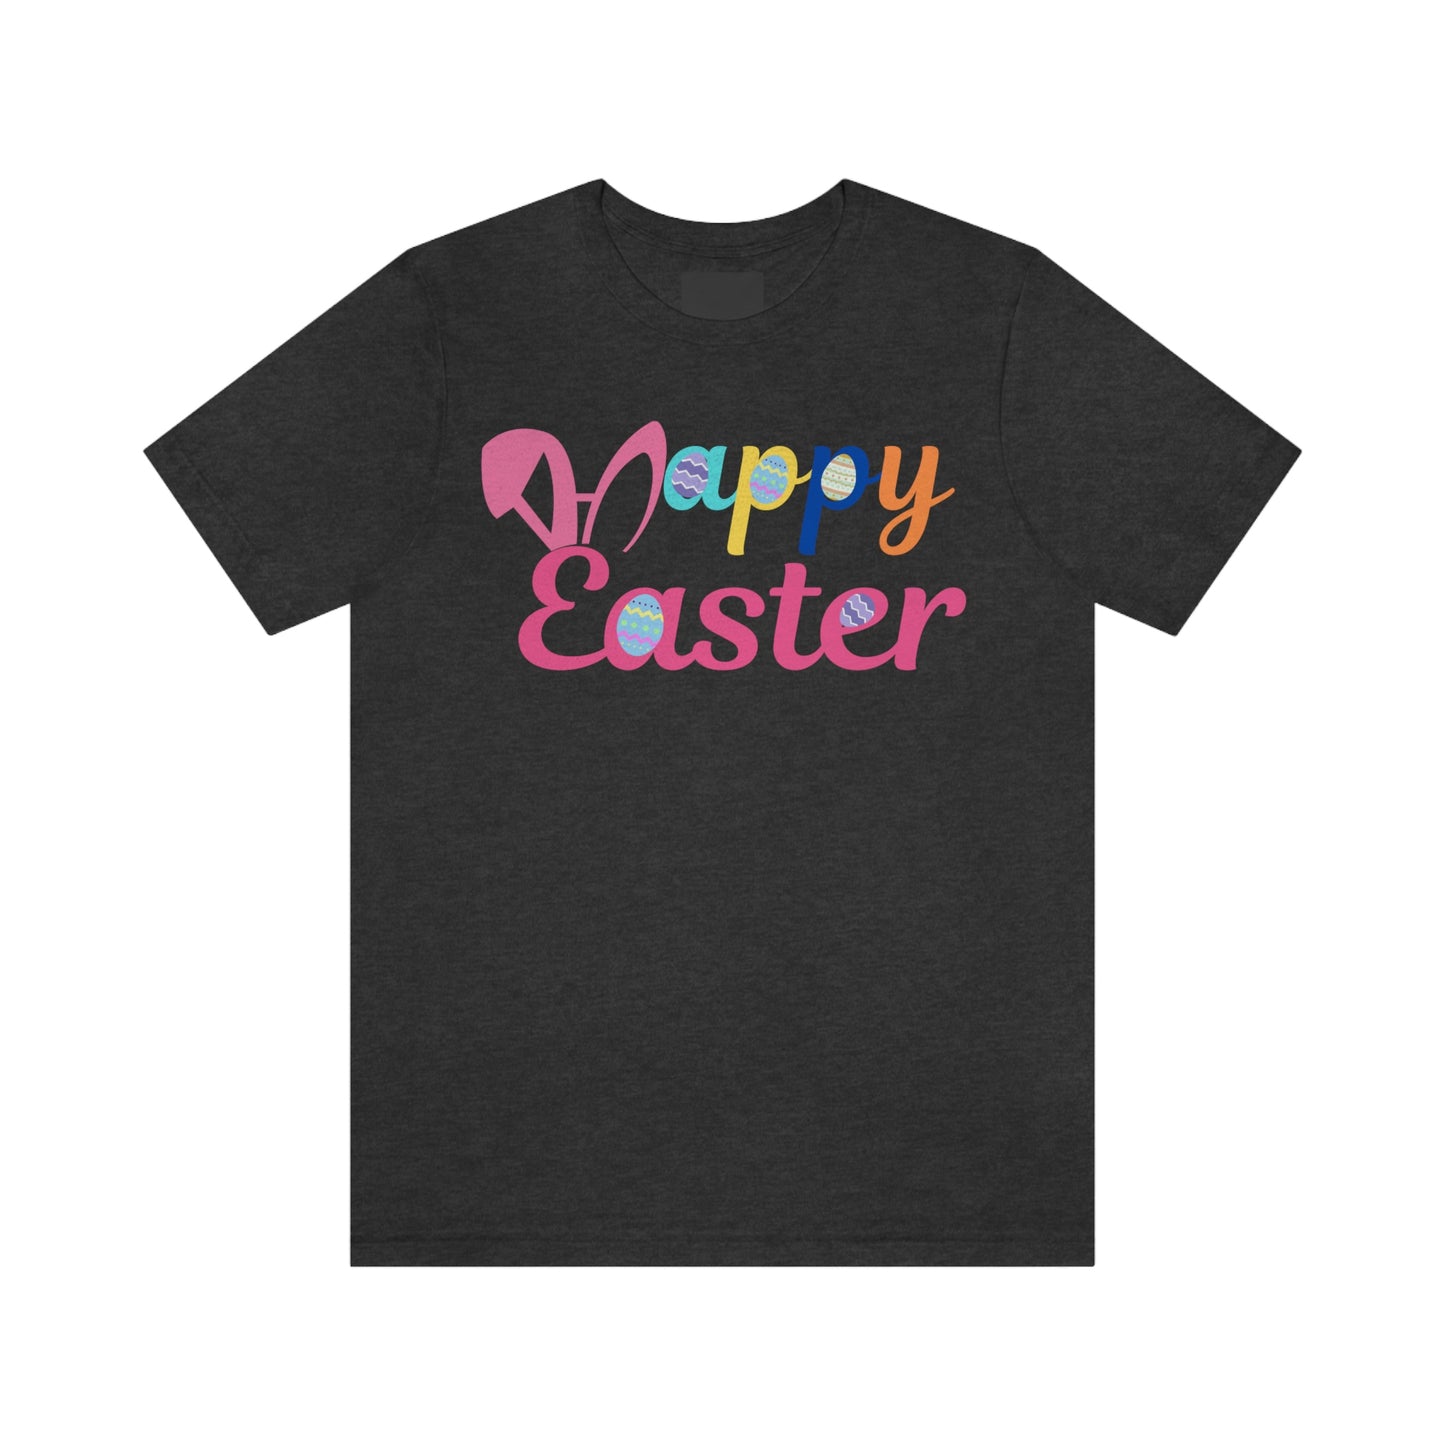 Happy Easter T-shirt